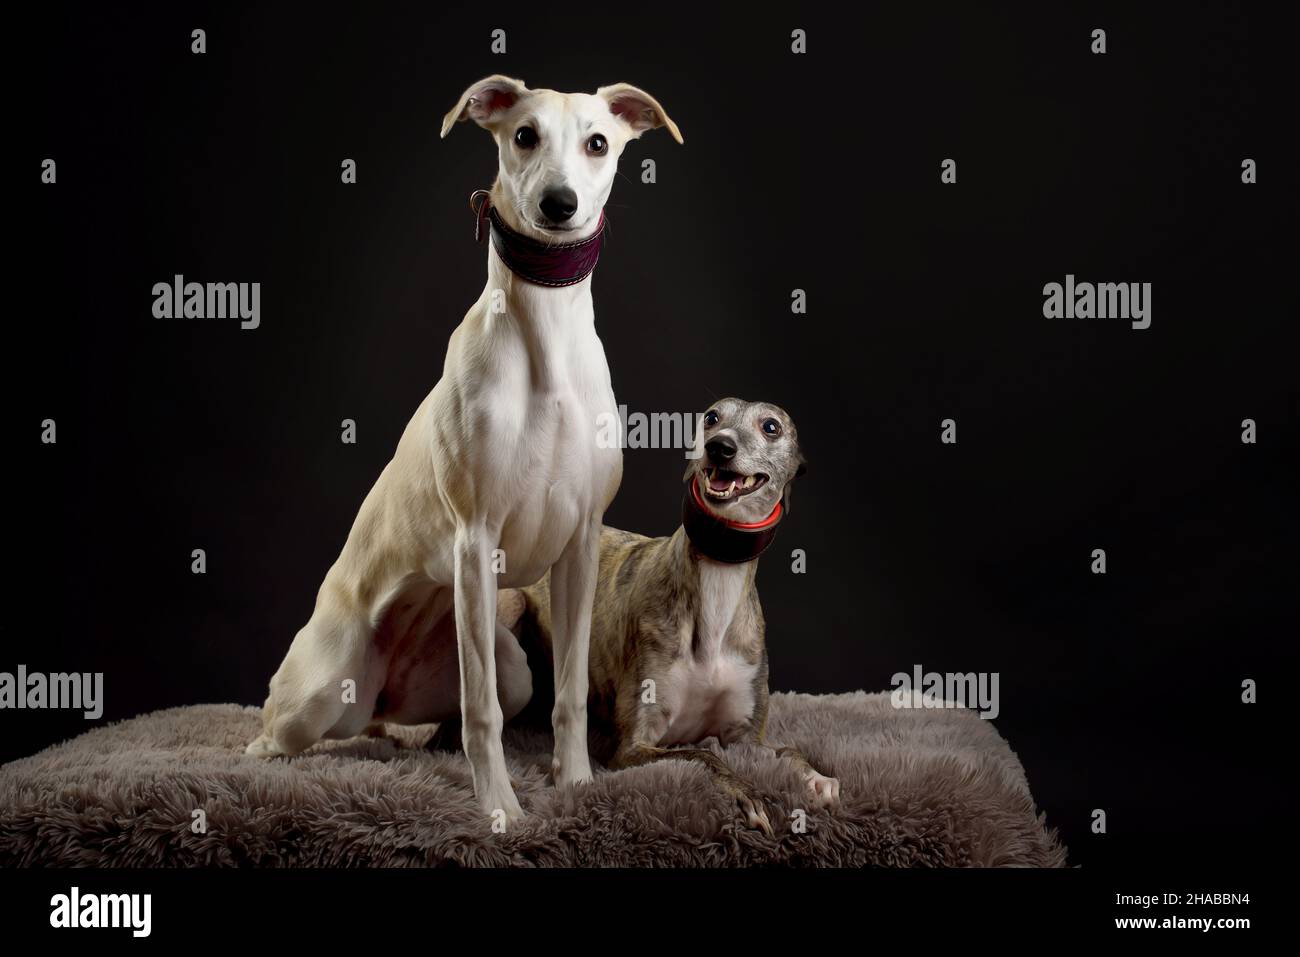 Whippets in the studio. A dog portrait of a two whippet dogs on black background. Stock Photo